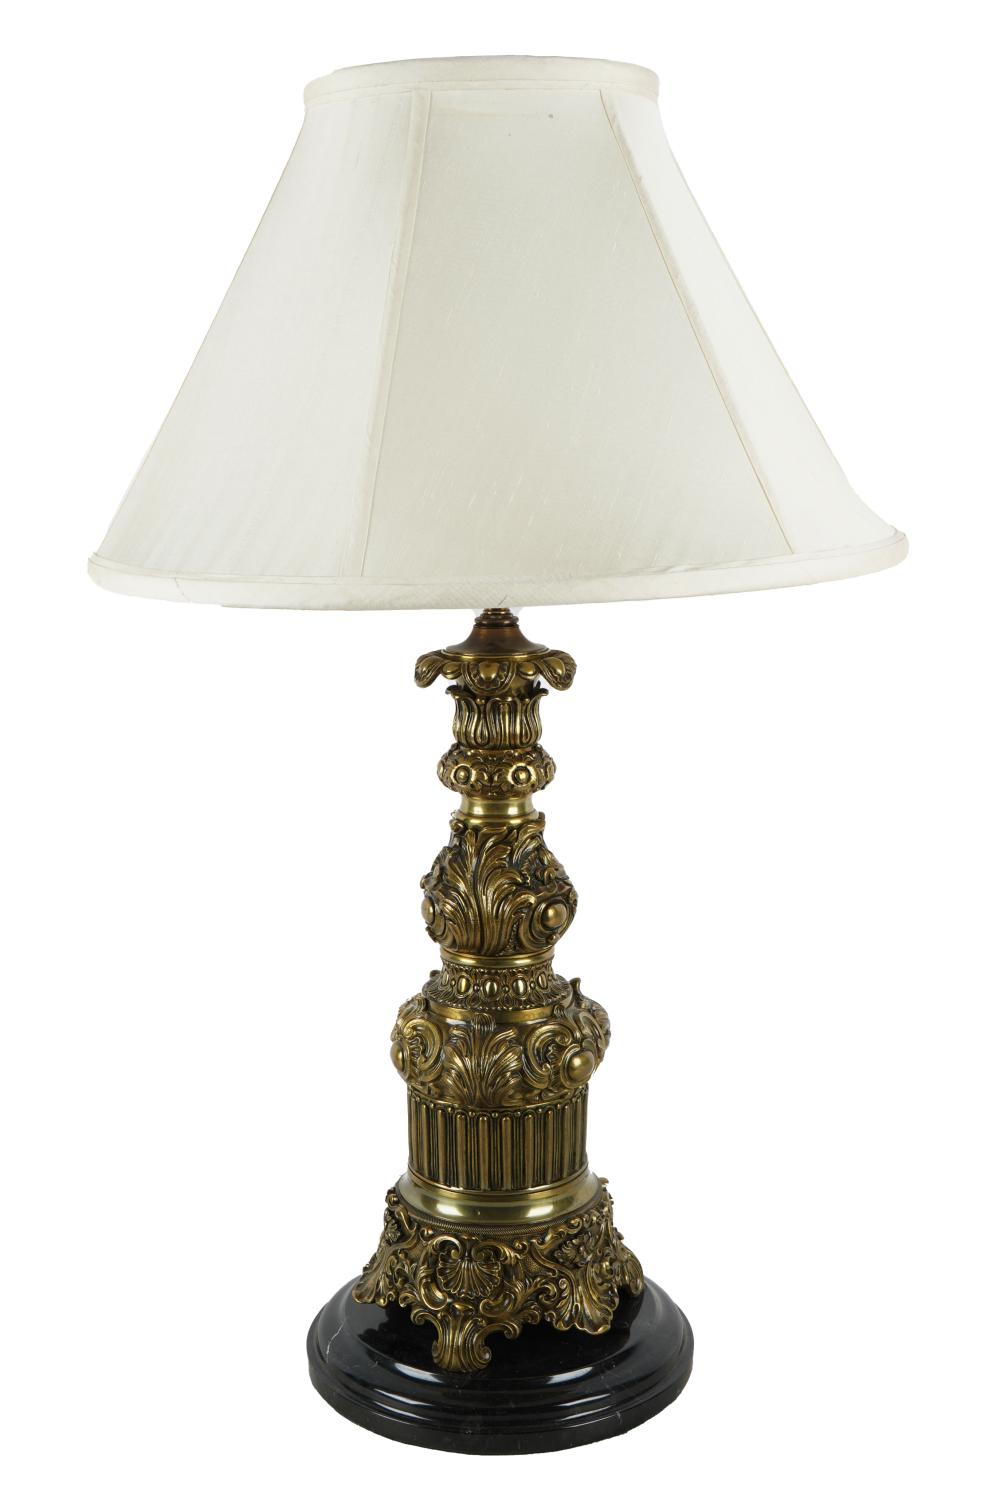 BRONZE ELECTRIFIED OIL LAMPwith 332945